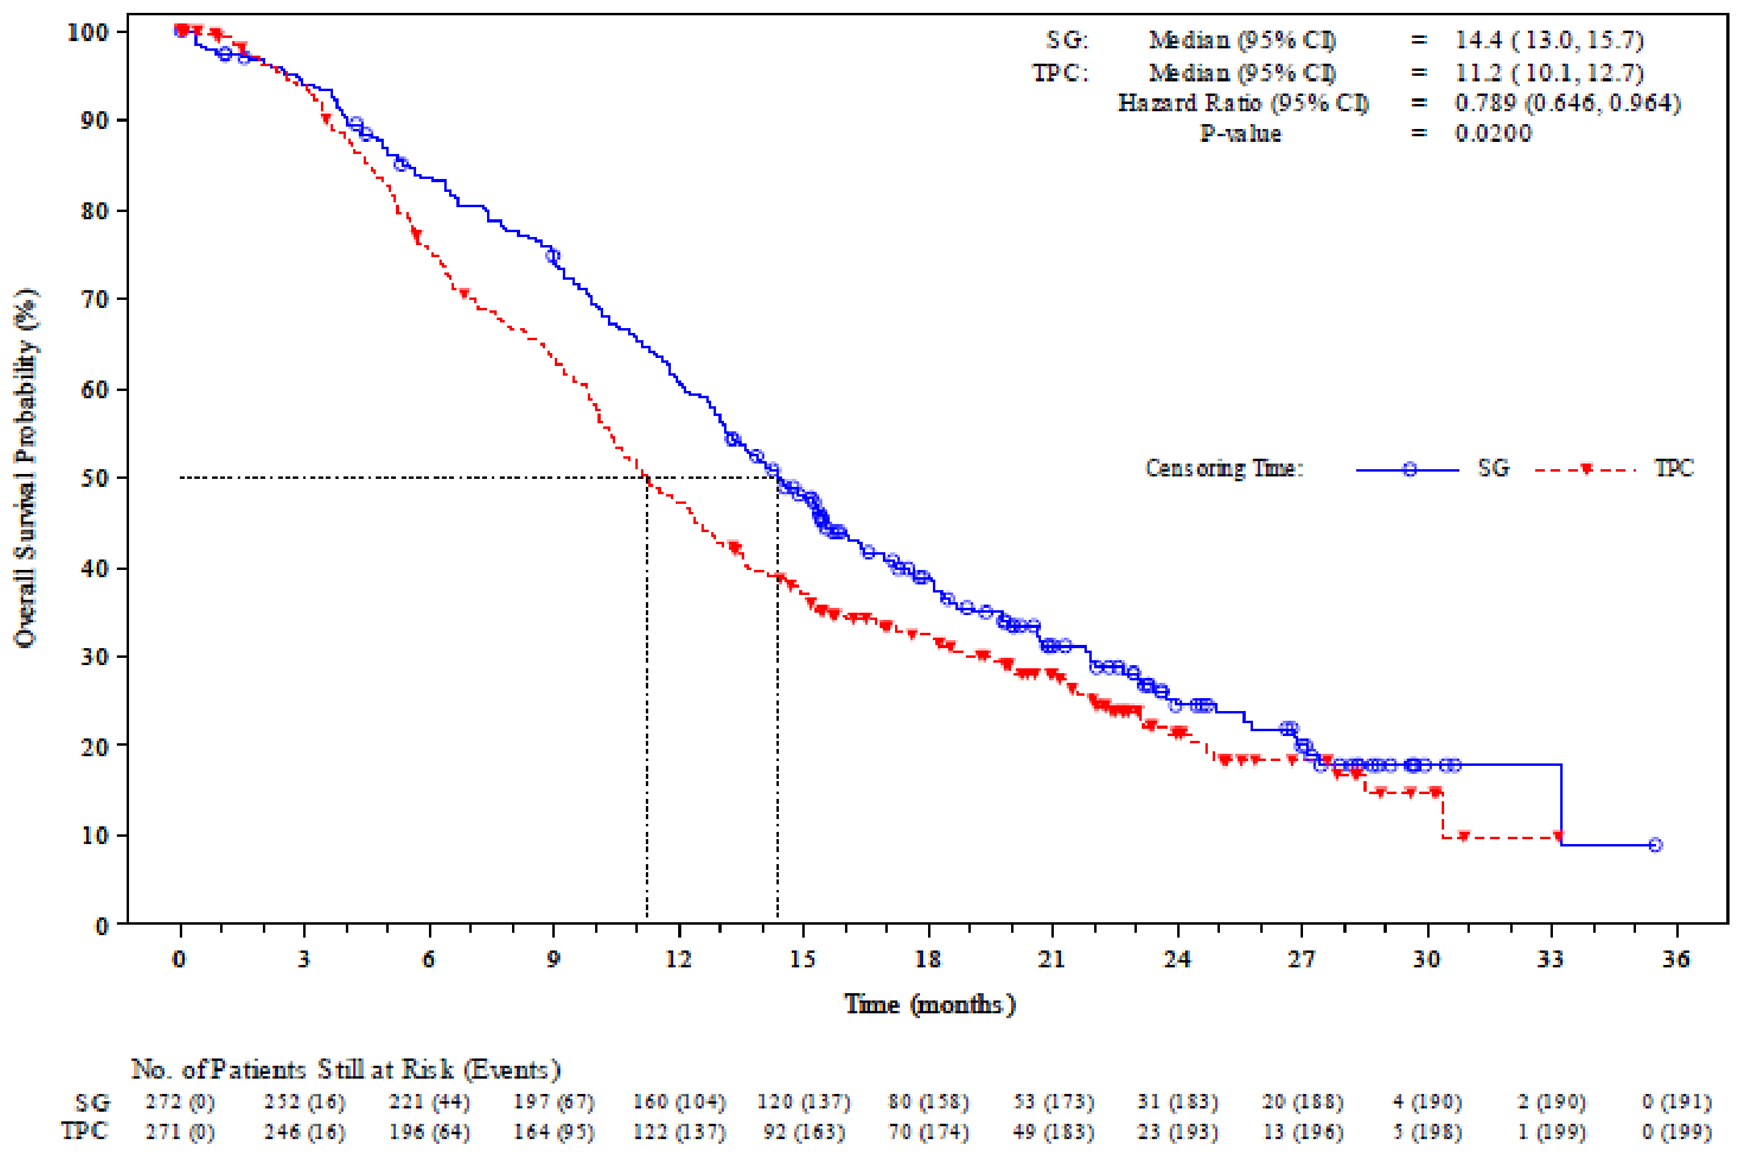 The sacituzumab govitecan and TPC curves separated at first and overlapped approximately 2 months to 3 months after randomization; after that, the 2 curves separated through the remainder of patient follow-up. At 12 months, the KM estimates were 61% (95% CI, 55 to 66) in the sacituzumab govitecan group and 47% (95% CI, 41 to 53) in the TPC group.